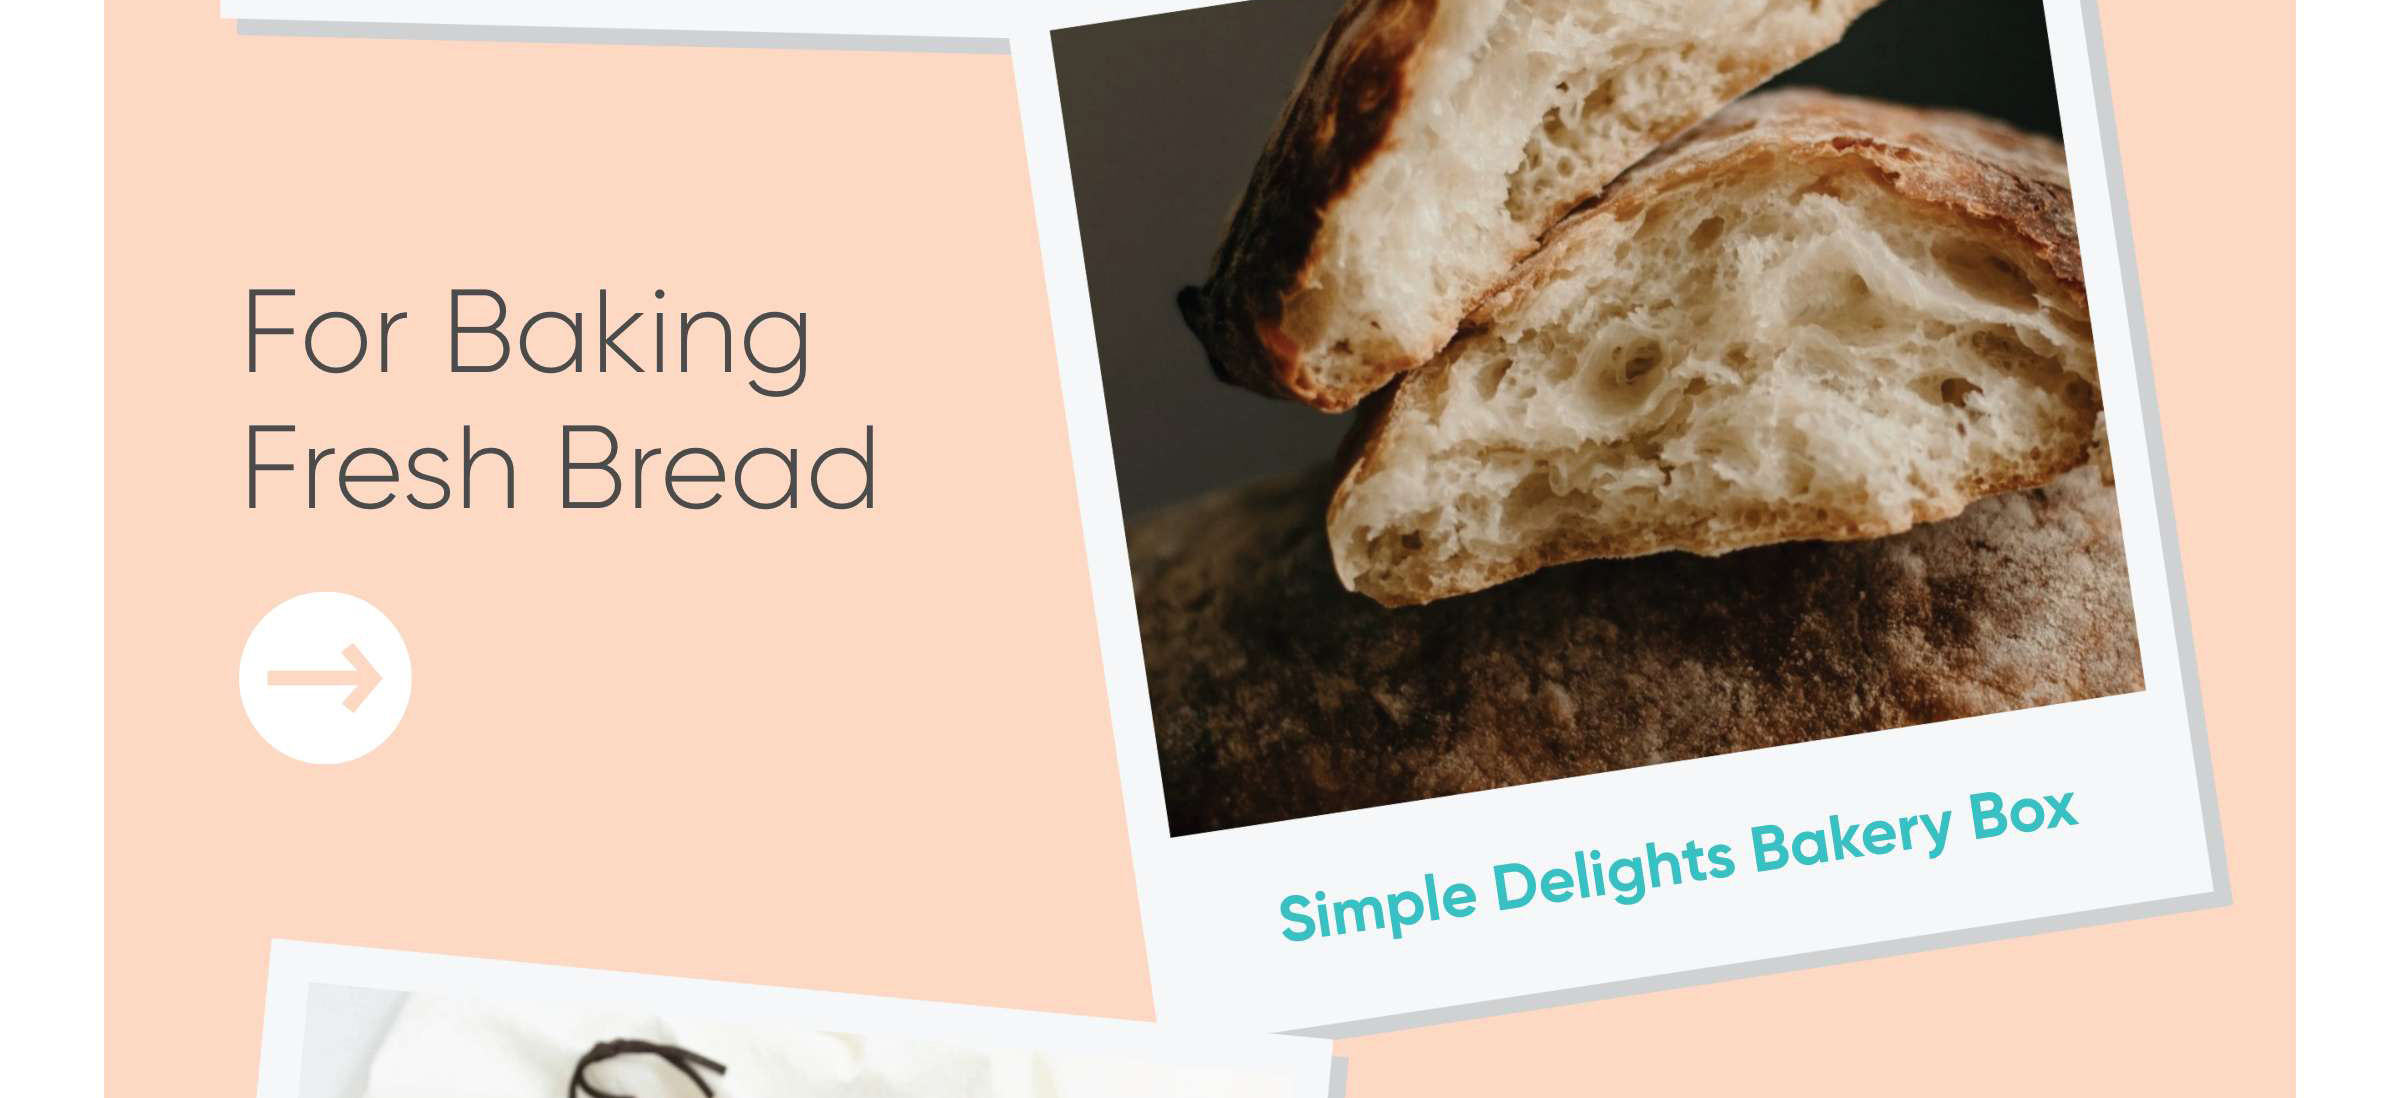 For Baking Fresh Bread  Simple Delights Bakery Box